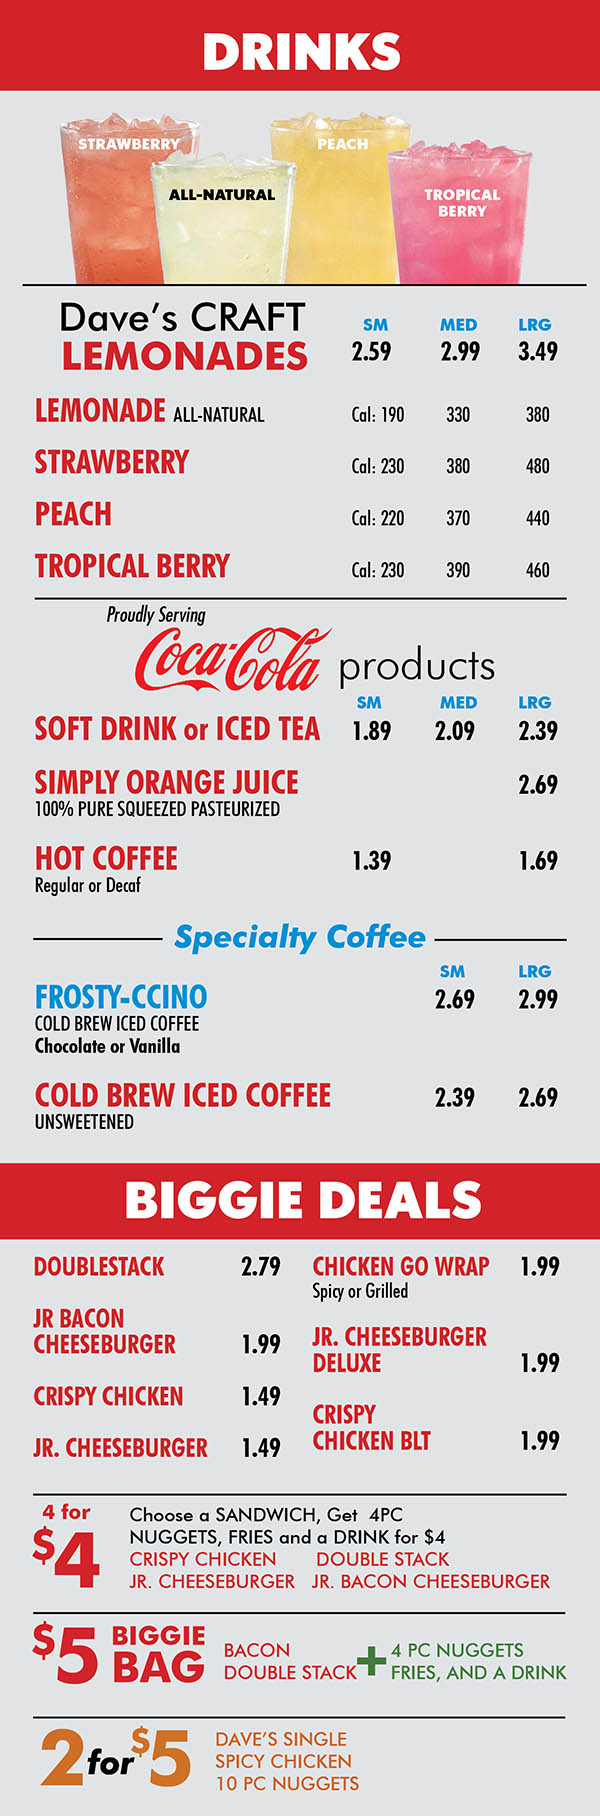 Wendy's S 84th St Lincoln NE Menu Page 5
DRINKS
STRAWBERRY
PEACH
ALL-NATURAL
TROPICAL
BERRY
Dave’s CRAFT SM MED LRG
LEMONADES 2.59 2.99 3.49 LEMONADE ALL-NATURAL Cal: 190 330 380
STRAWBERRY Cal: 230 380 480
PEACH Cal: 220 370 440
TROPICAL BERRY Cal: 230 390 460
Proudly Serving
products
SM MED LRG
SOFT DRINK or ICED TEA 1.89 2.09 2.39
SIMPLY ORANGE JUICE 2.69
100% PURE SQUEEZED PASTEURIZED
HOT COFFEE 1.39 1.69
Regular or Decaf
Specialty Coffee
SM LRG
FROSTY-CCINO 2.69 2.99
COLD BREW ICED COFFEE
Chocolate or Vanilla
COLD BREW ICED COFFEE 2.39 2.69
UNSWEETENED
BIGGIE DEALS
DOUBLESTACK 2.79 JR BACON CHEESEBURGER 1.99 CRISPY CHICKEN 1.49 JR. CHEESEBURGER 1.49
CHICKEN GO WRAP 1.99
Spicy or Grilled
JR. CHEESEBURGER
DELUXE 1.99
CRISPY
CHICKEN BLT 1.99
4 for
$4
Choose a SANDWICH, Get 4PC
NUGGETS, FRIES and a DRINK for $4
CRISPY CHICKEN DOUBLE STACK
JR. CHEESEBURGER JR. BACON CHEESEBURGER
$5
BIGGIE
BAG
BACON
DOUBLE STACK
+
4 PC NUGGETS
FRIES, AND A DRINK
2for$5
DAVE’S SINGLE
SPICY CHICKEN
10 PC NUGGETS